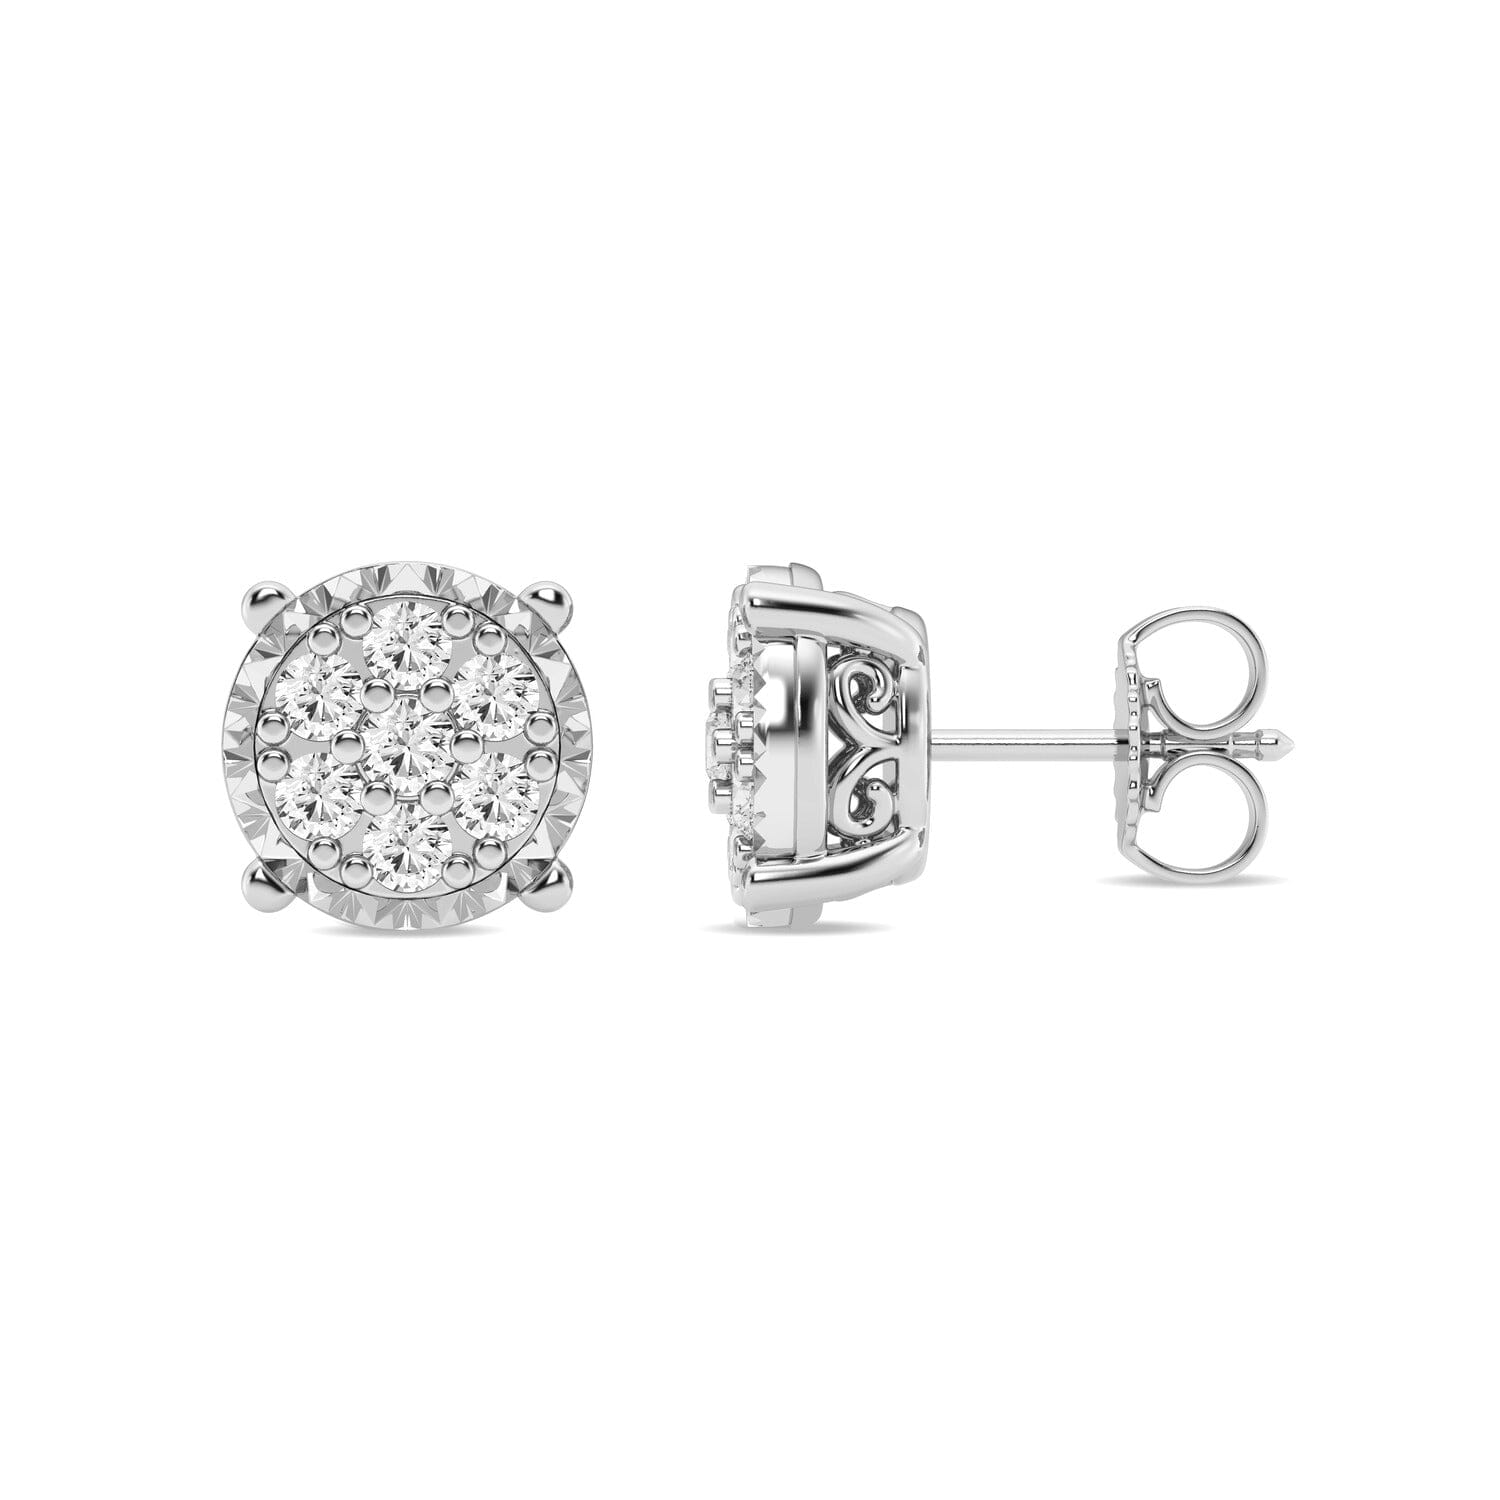 Meera Flower Composite Earrings with 1/3ct of Laboratory Grown Diamonds in 9ct White Gold Earrings Bevilles 